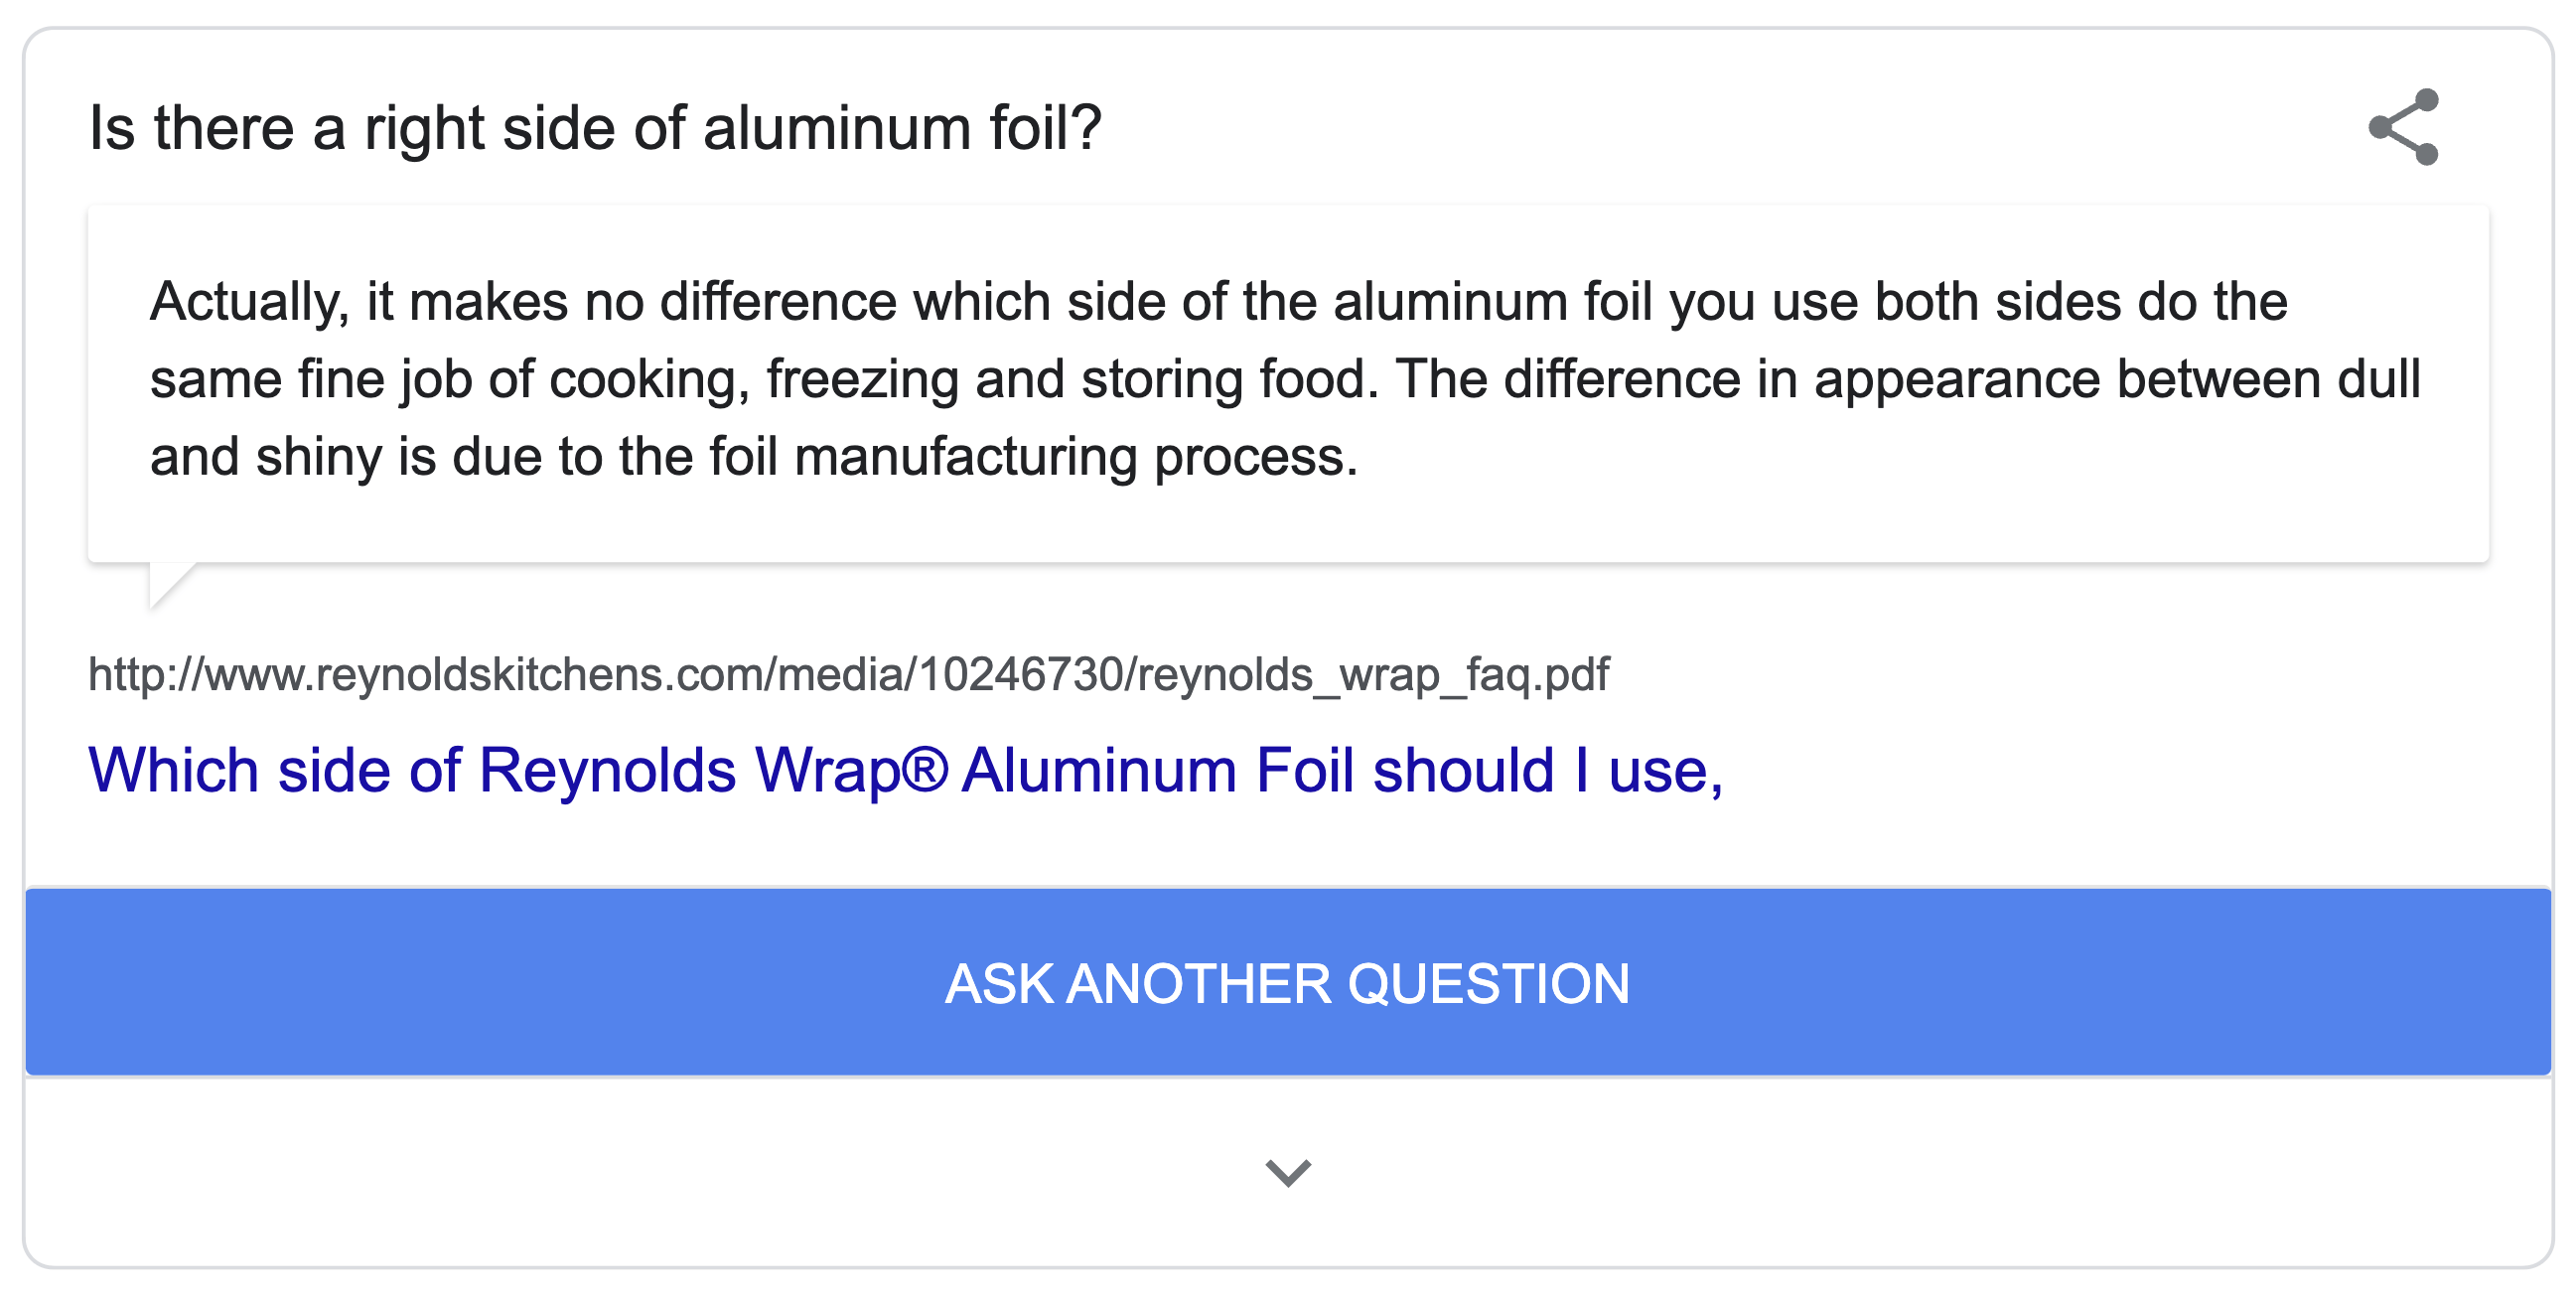 i'm feeling curious is there a right side of aluminum foil?